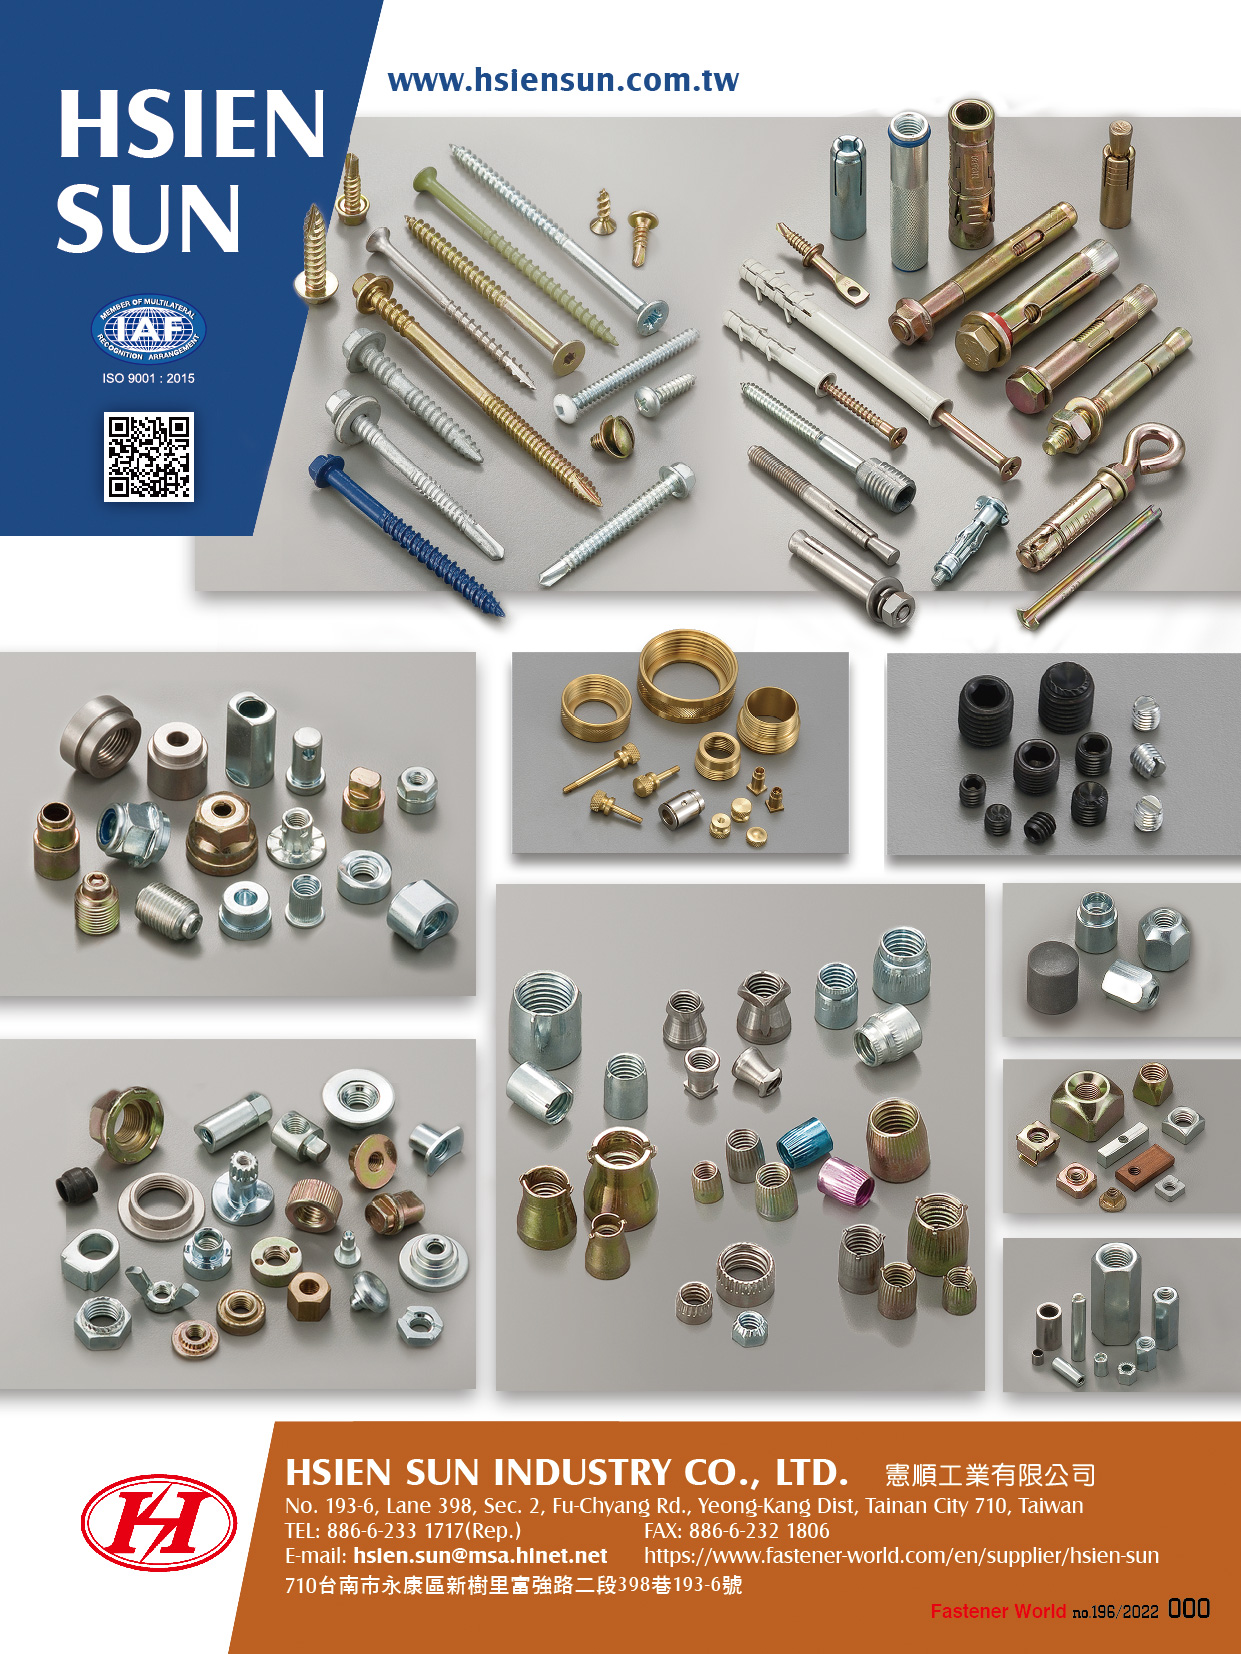 HSIEN SUN INDUSTRY CO., LTD.  , Conical Nuts, Anchor, Concrete Sleeve Anchor, Sleeve Anchor Bolt Type, Sleeve Anchor Flange Type, Heavy Duty Anchor, Zmark Heavy Duty Anchor, Wedge Anchor Nuts, Concrete Wedge Anchor, Nylon Frame Anchor (With Ring), Nylon Nail Anchor With Screw, Special Nuts, Autoparts Nuts, Bicycle Nuts, Cap Nuts, Furniture Nuts, Hex & Round Coupling Nuts, Locking Nuts, Square Nuts, Thread Nuts, T Nuts, Turning Part, Set Screws,Self Drilling Screws, Tapping Screws, Chipboard Screws